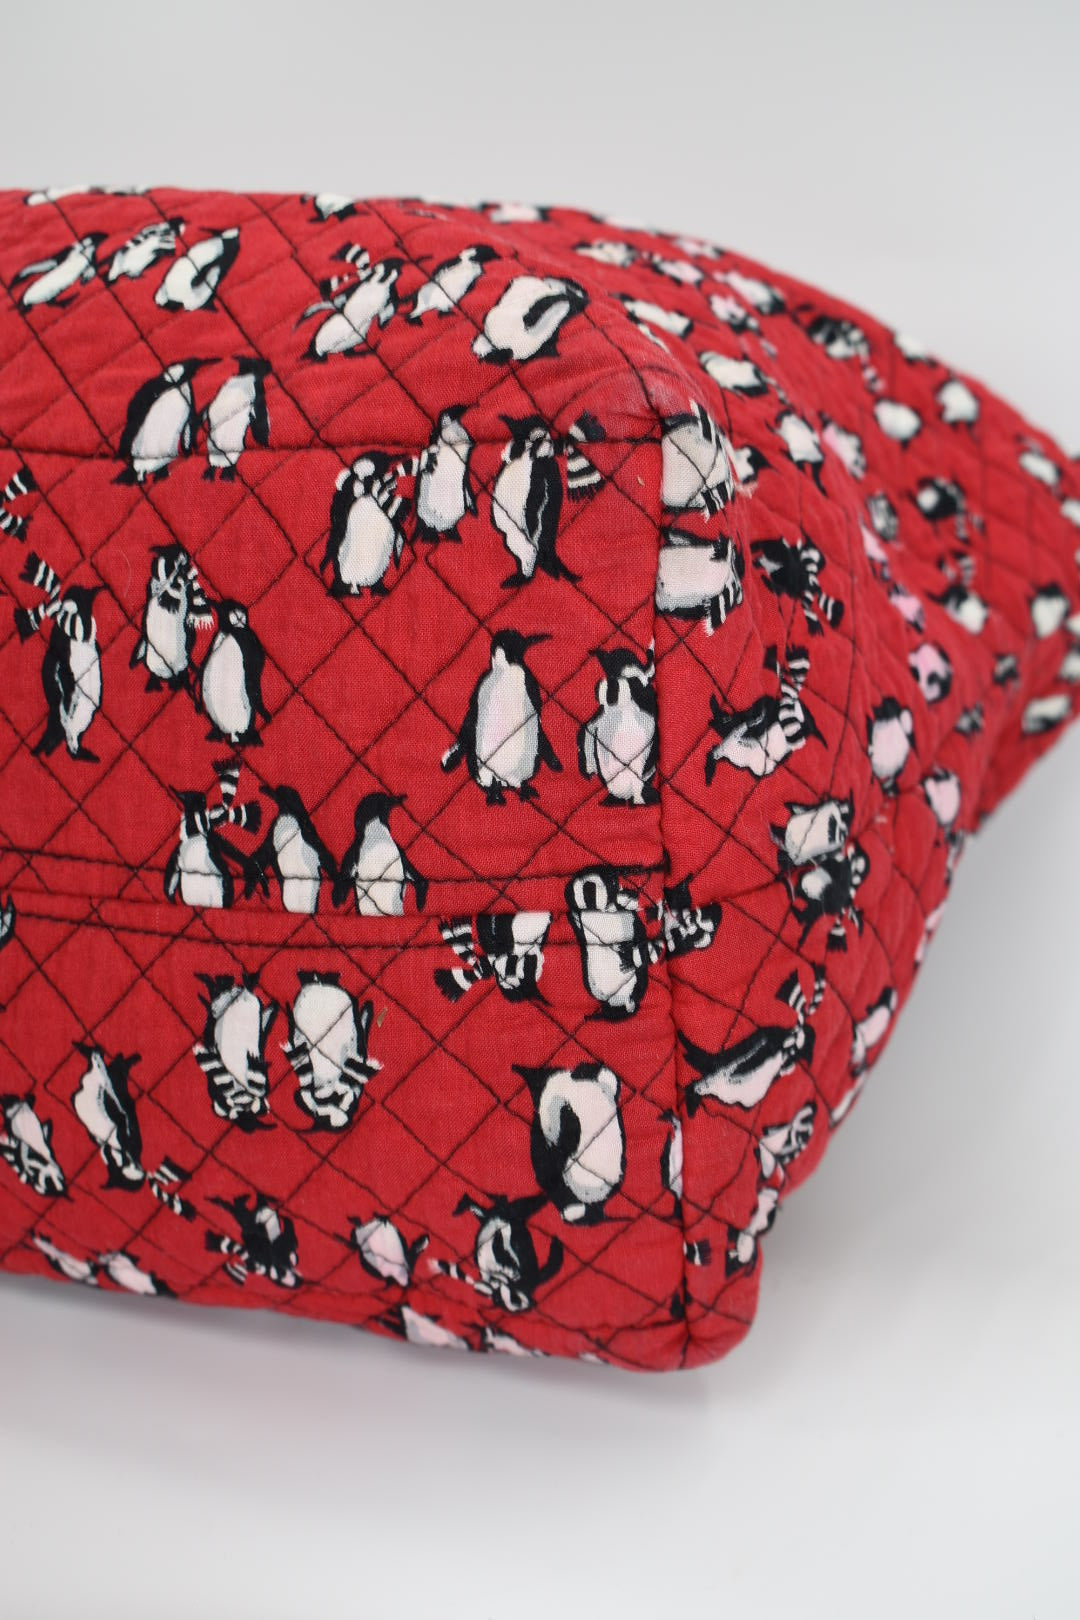 Vera Bradley Iconic Grand Tote Bag in "Playful Penguins Red" Pattern